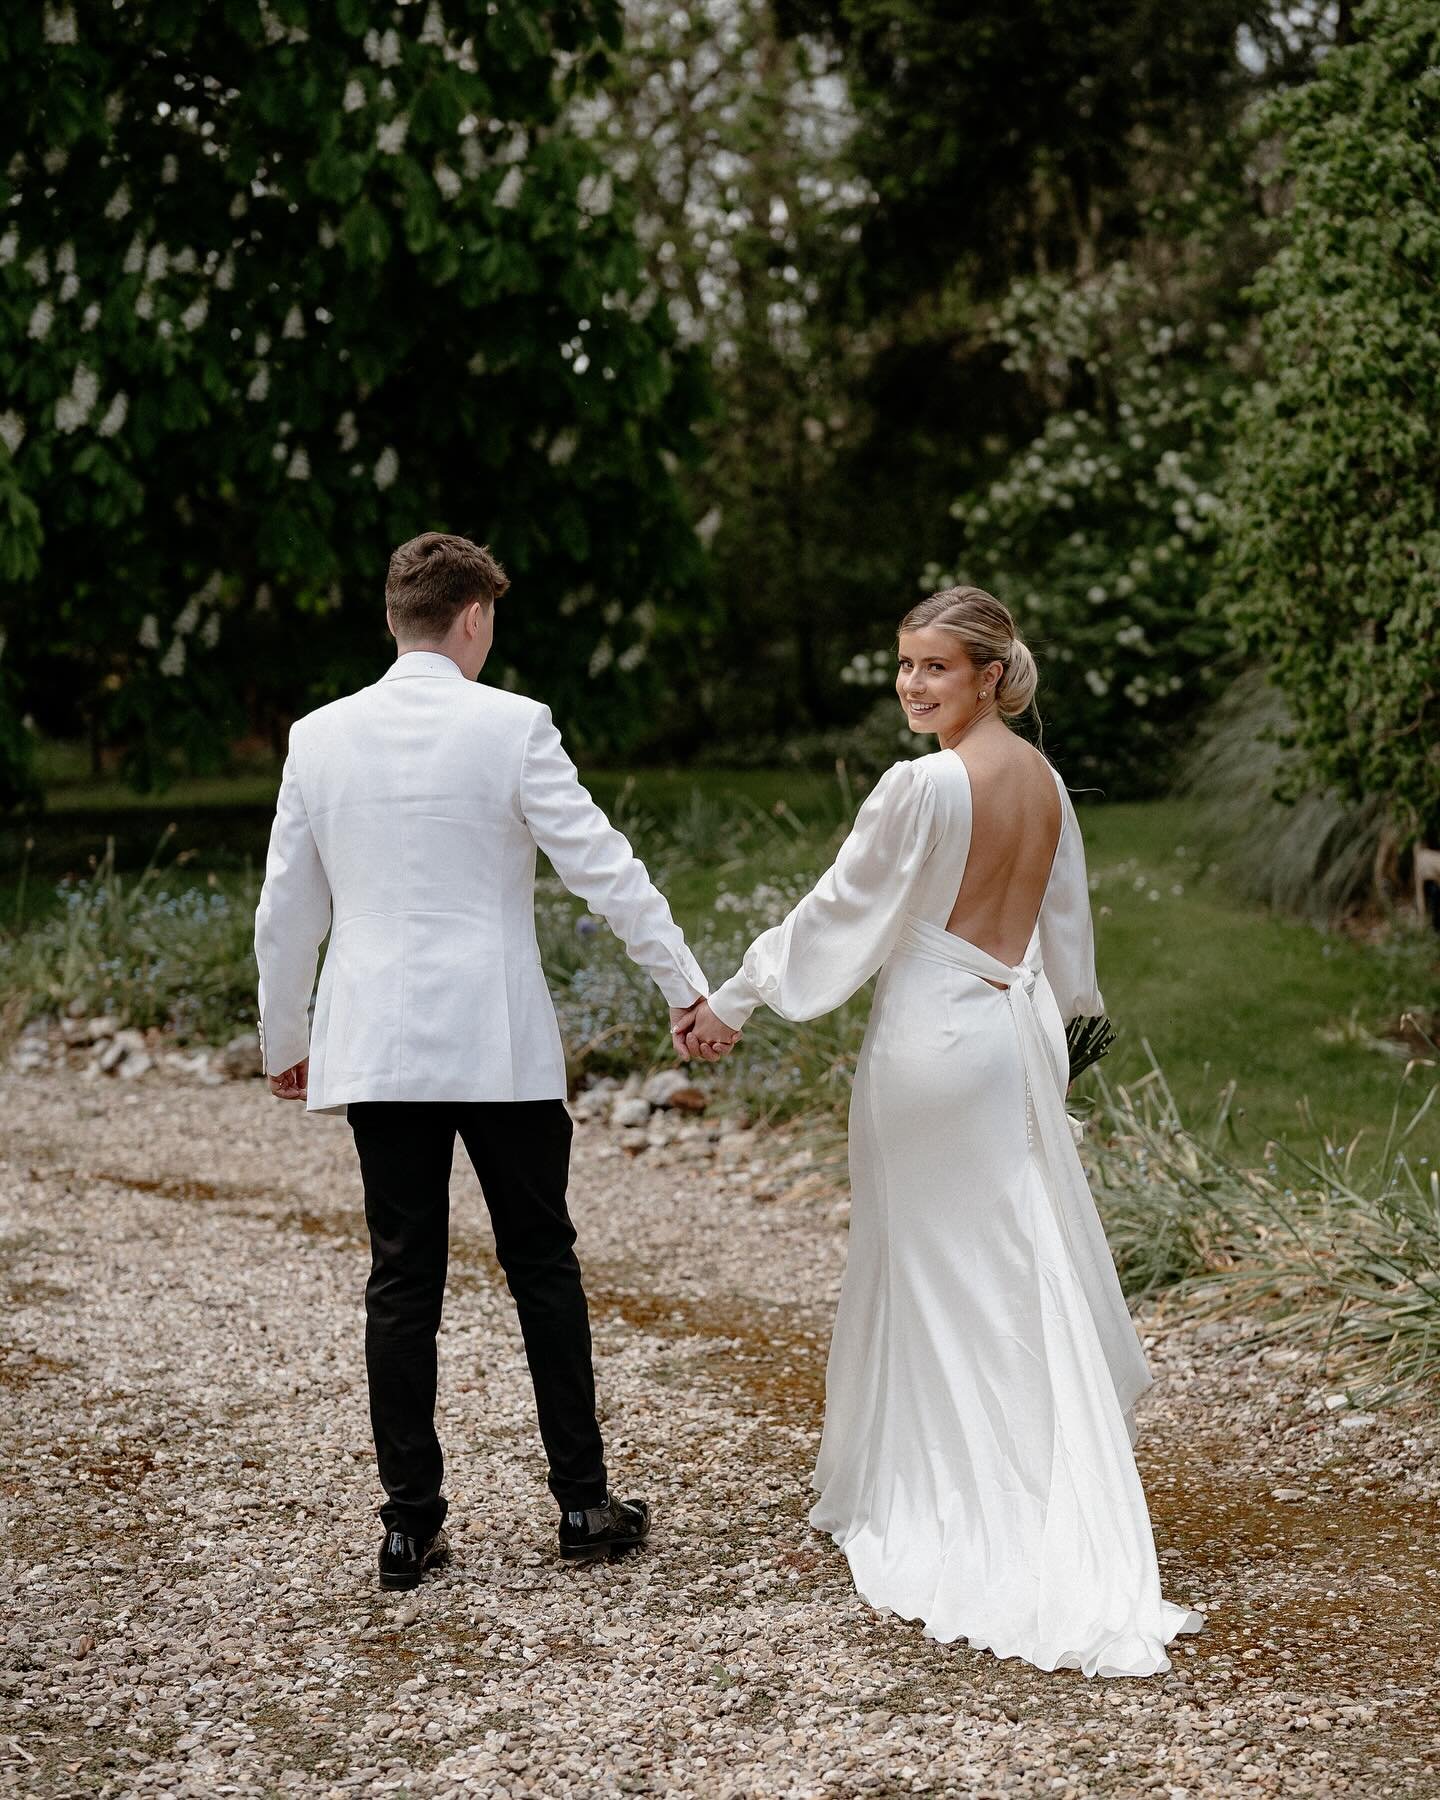 Saturdays wedding was *chefs kiss* 

An incredible day with Georgie and James and their wonderful friends and families at @manormewsnorfolk &hellip; Combining elegance and romance with a modern twist and a whole lot of fun!  The love these guys have 